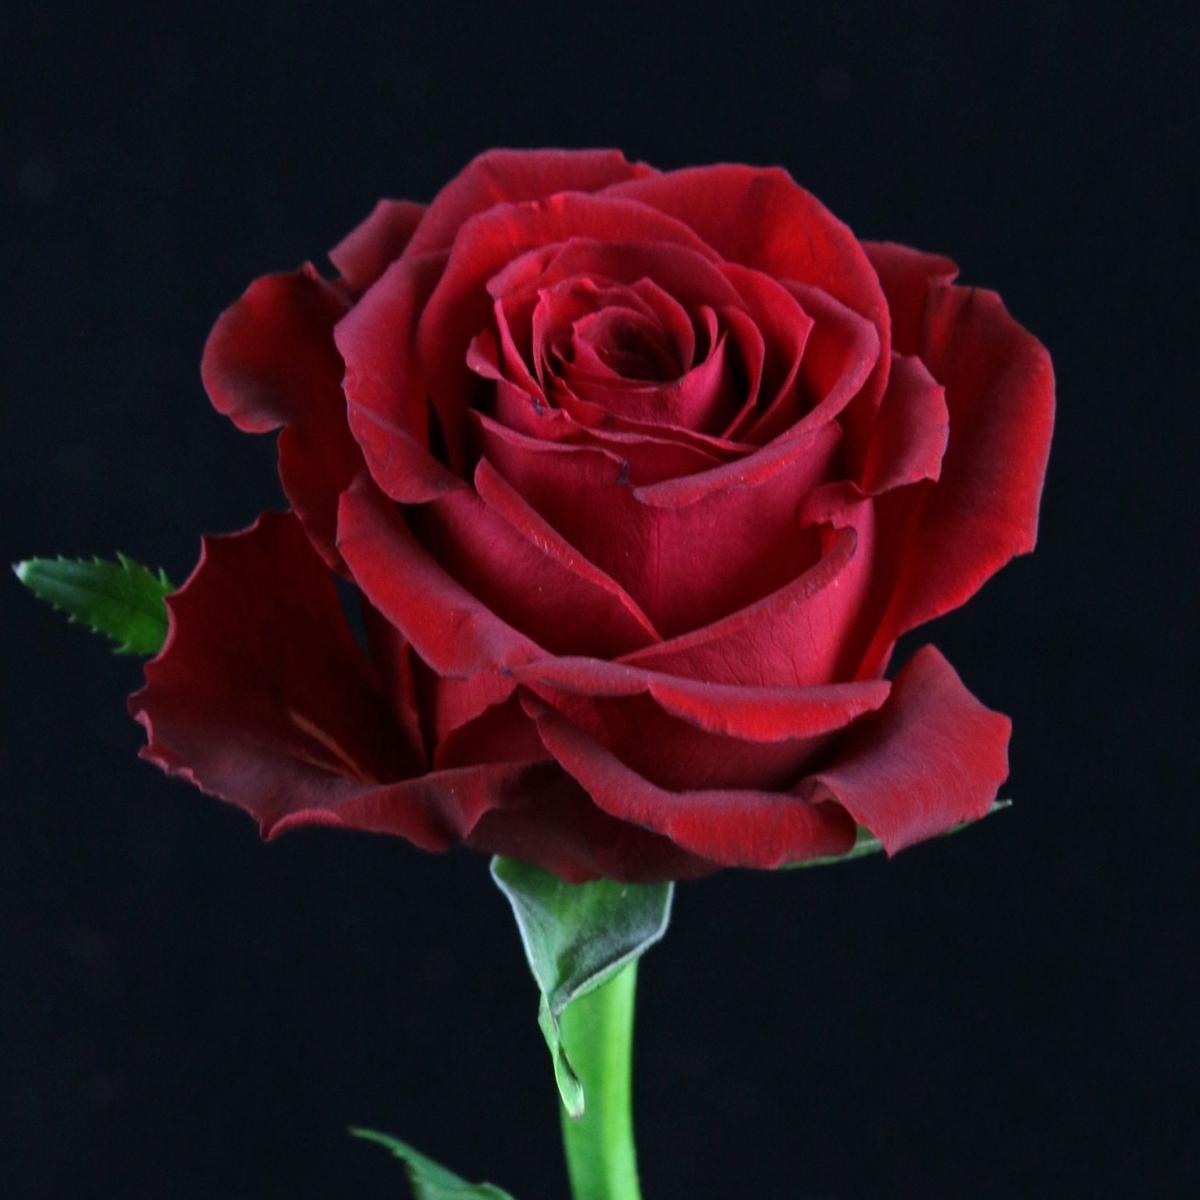 These Are the Most Beautiful Red Roses for Christmas009